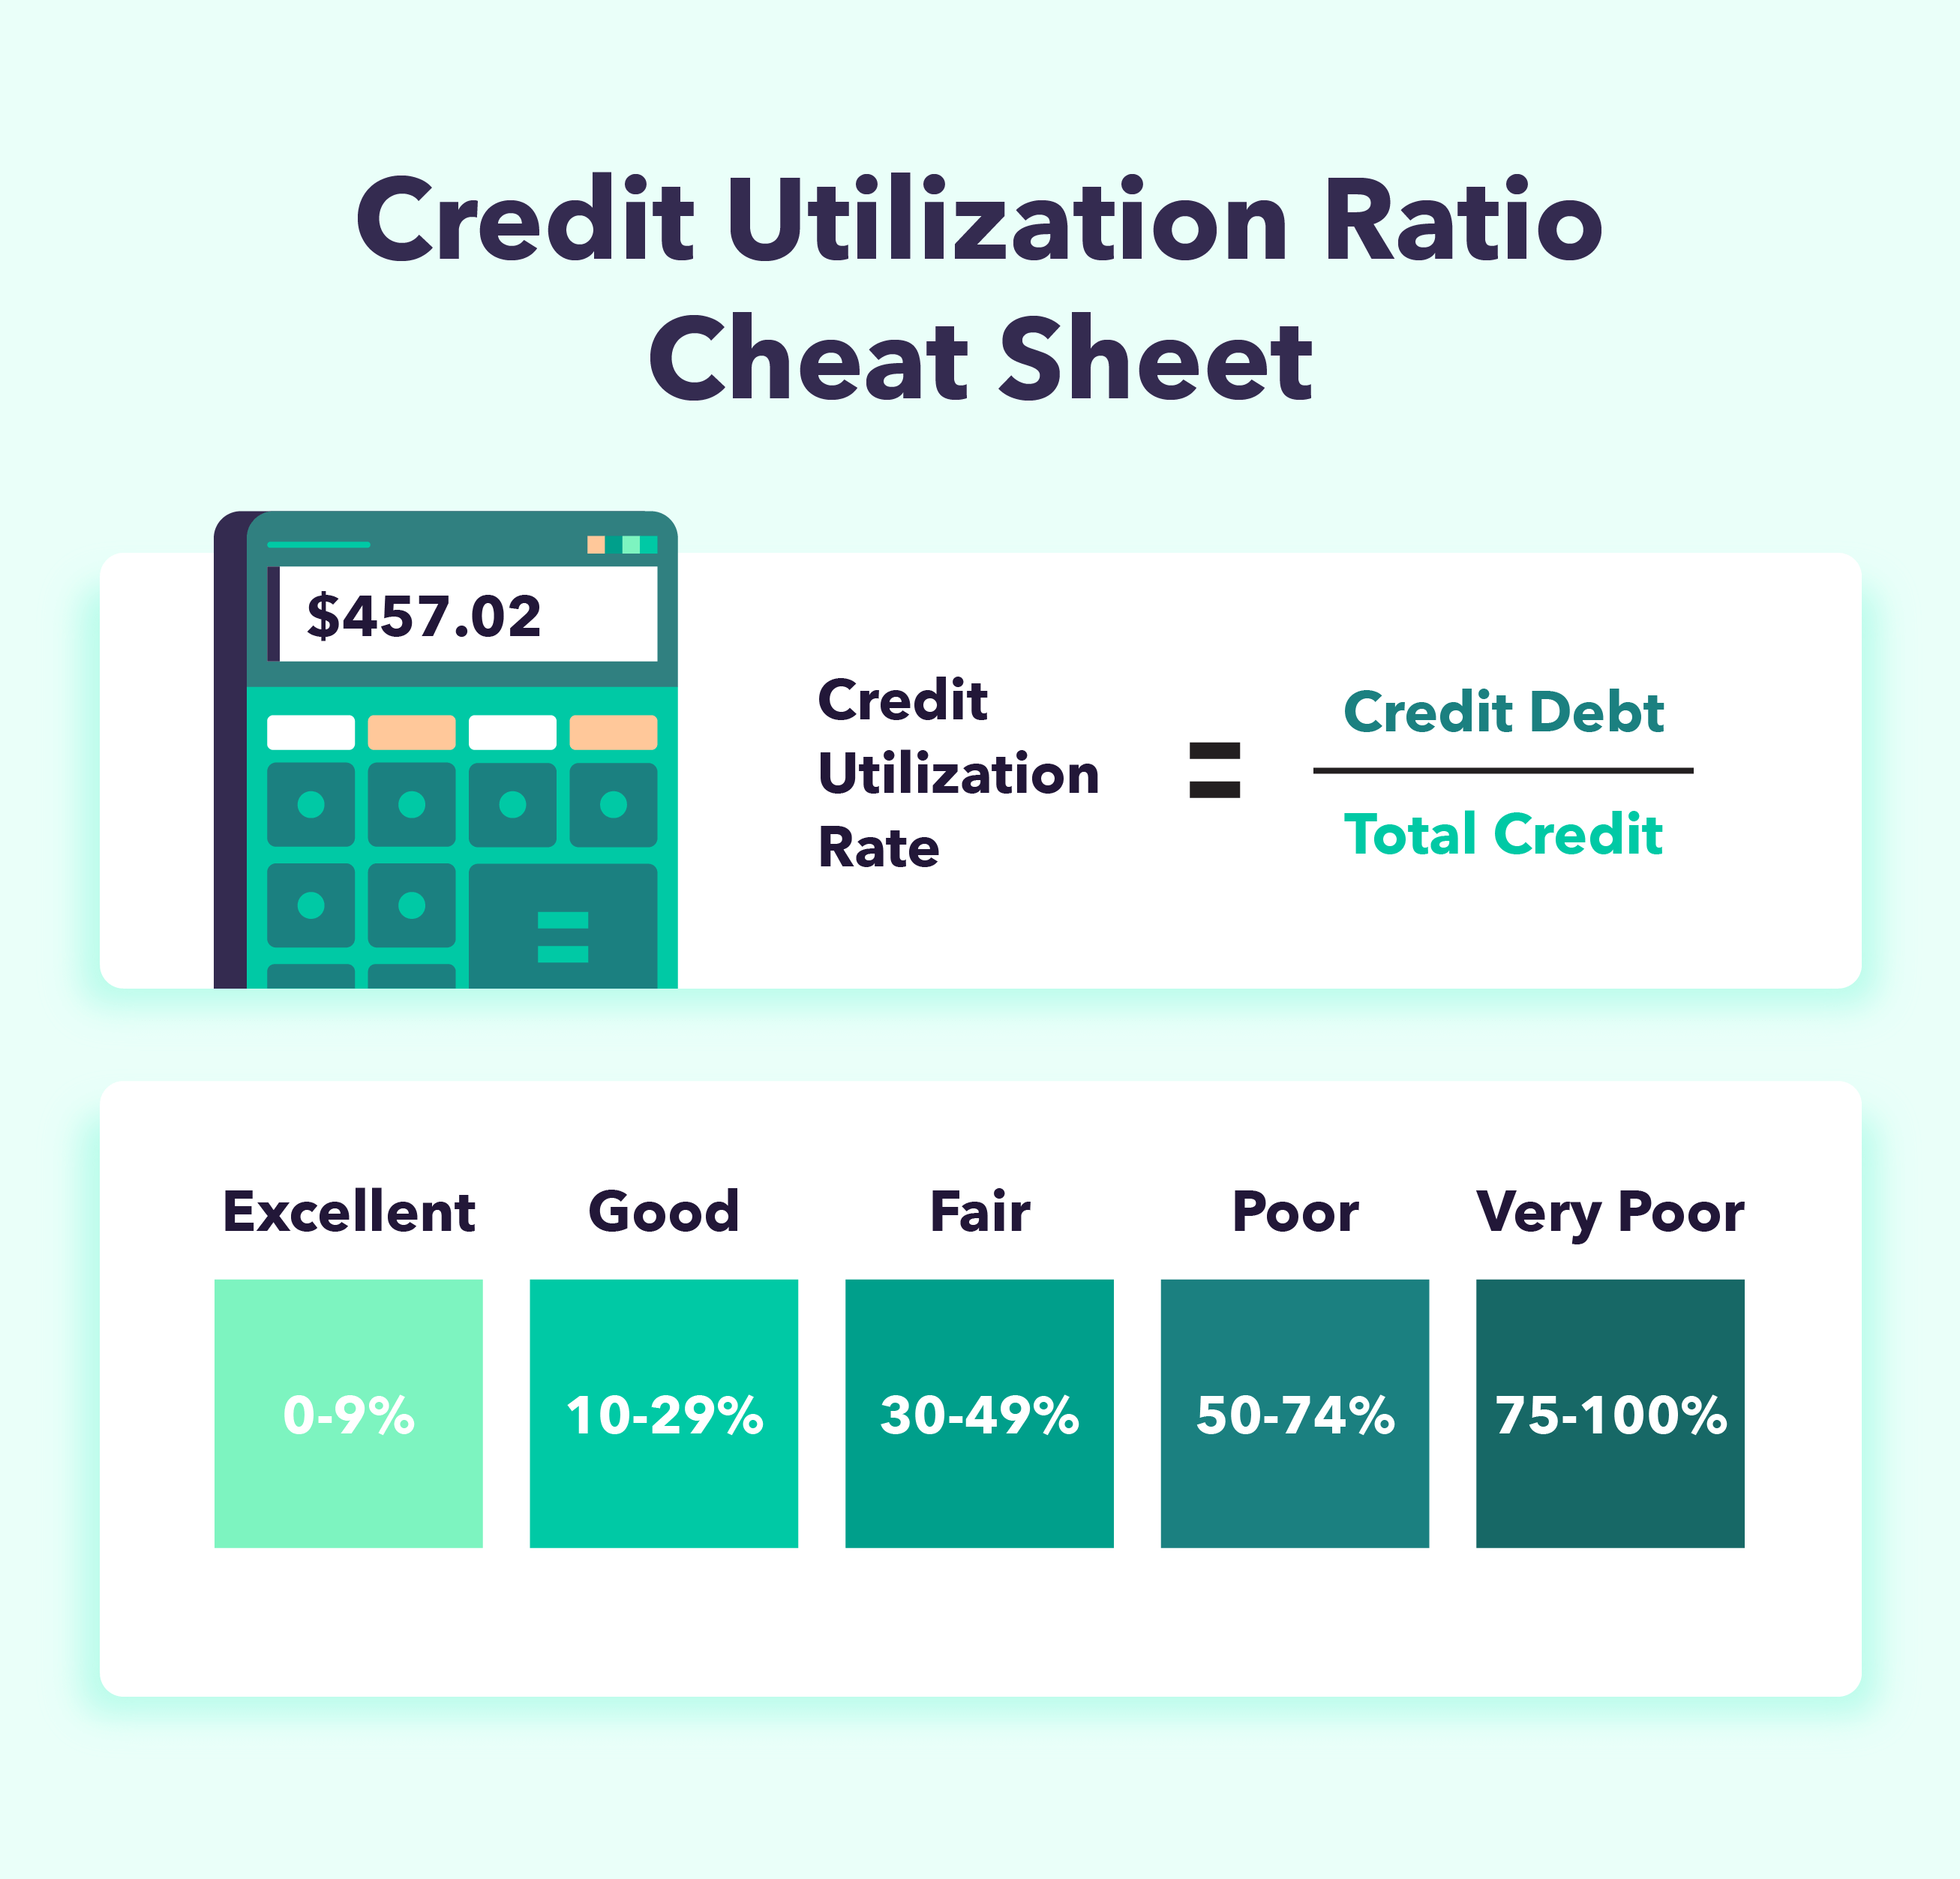 An image of a calculator and information regarding the credit utilization ratio formula (credit debt divided by total available credit) along with a graph showing ratios from excellent to very poor.